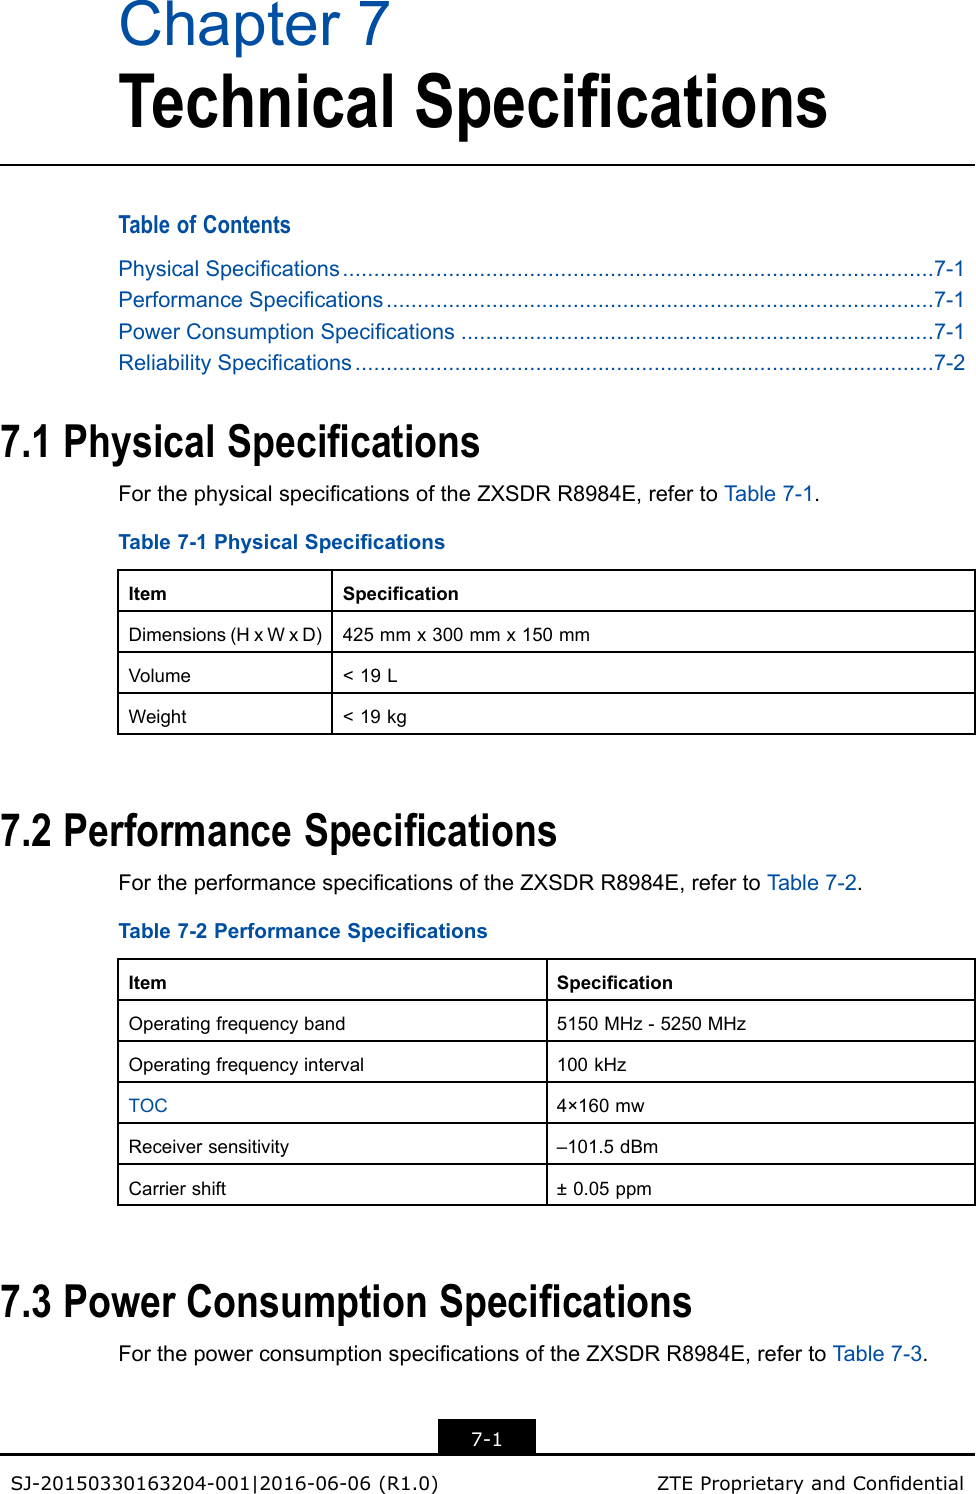 Chapter7TechnicalSpecicationsTableofContentsPhysicalSpecications...............................................................................................7-1PerformanceSpecications........................................................................................7-1PowerConsumptionSpecications............................................................................7-1ReliabilitySpecications.............................................................................................7-27.1PhysicalSpecicationsForthephysicalspecicationsoftheZXSDRR8984E,refertoT able7-1.Table7-1PhysicalSpecicationsItemSpecicationDimensions(HxWxD)425mmx300mmx150mmVolume&lt;19LWeight&lt;19kg7.2PerformanceSpecicationsFortheperformancespecicationsoftheZXSDRR8984E,refertoTable7-2.Table7-2PerformanceSpecicationsItemSpecicationOperatingfrequencyband5150MHz-5250MHzOperatingfrequencyinterval100kHzTOC4×160mwReceiversensitivity–101.5dBmCarriershift±0.05ppm7.3PowerConsumptionSpecicationsForthepowerconsumptionspecicationsoftheZXSDRR8984E,refertoT able7-3.7-1SJ-20150330163204-001|2016-06-06(R1.0)ZTEProprietaryandCondential